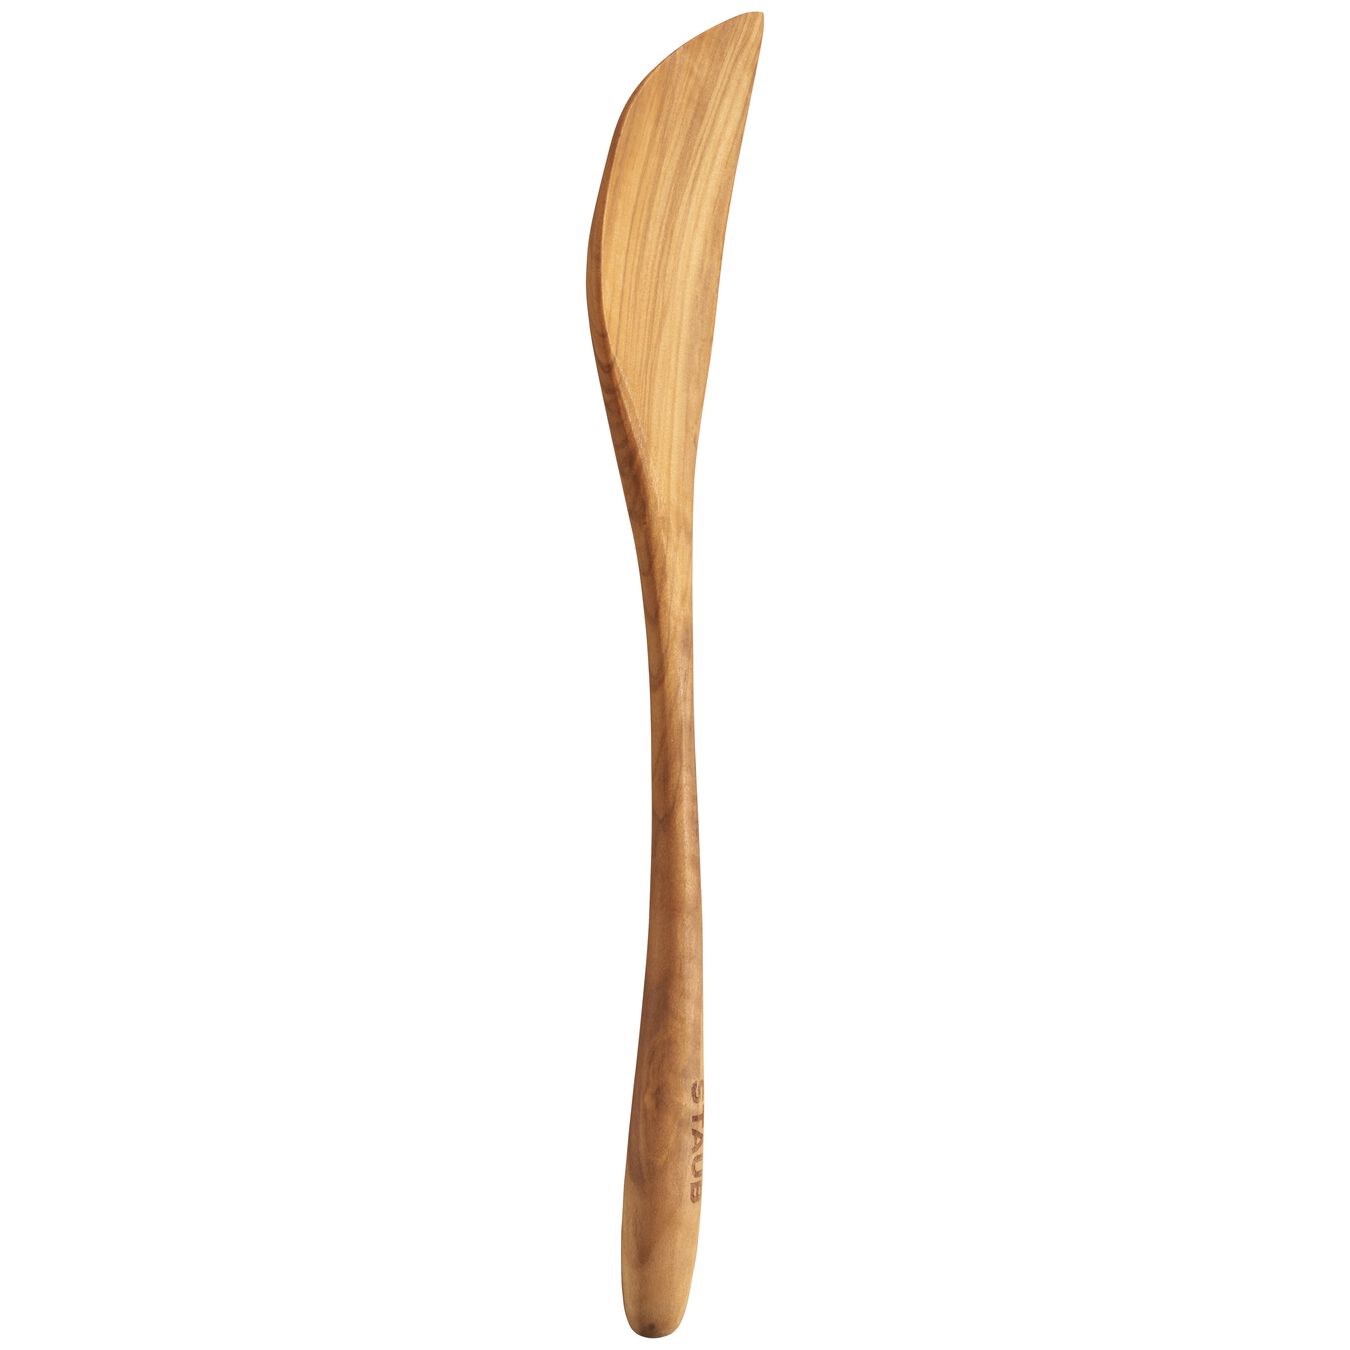 Scanwood: Olivewood Deluxe Curved Spatula 12 inch